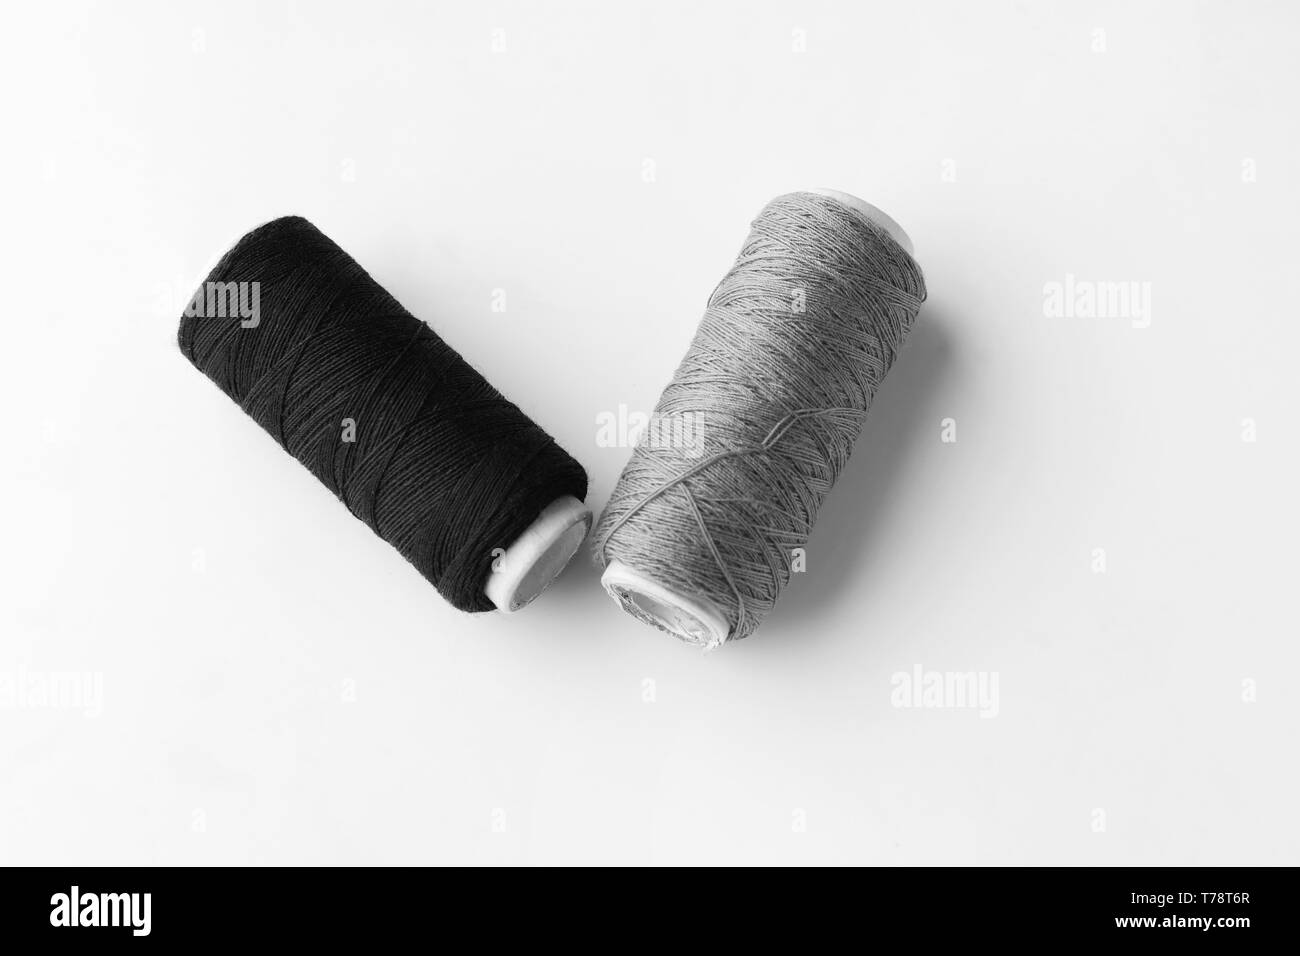 Bobbin Of White Thread Isolated On White Background, Monochrome Picture Of  Sewing Things Stock Photo, Picture and Royalty Free Image. Image 126663694.